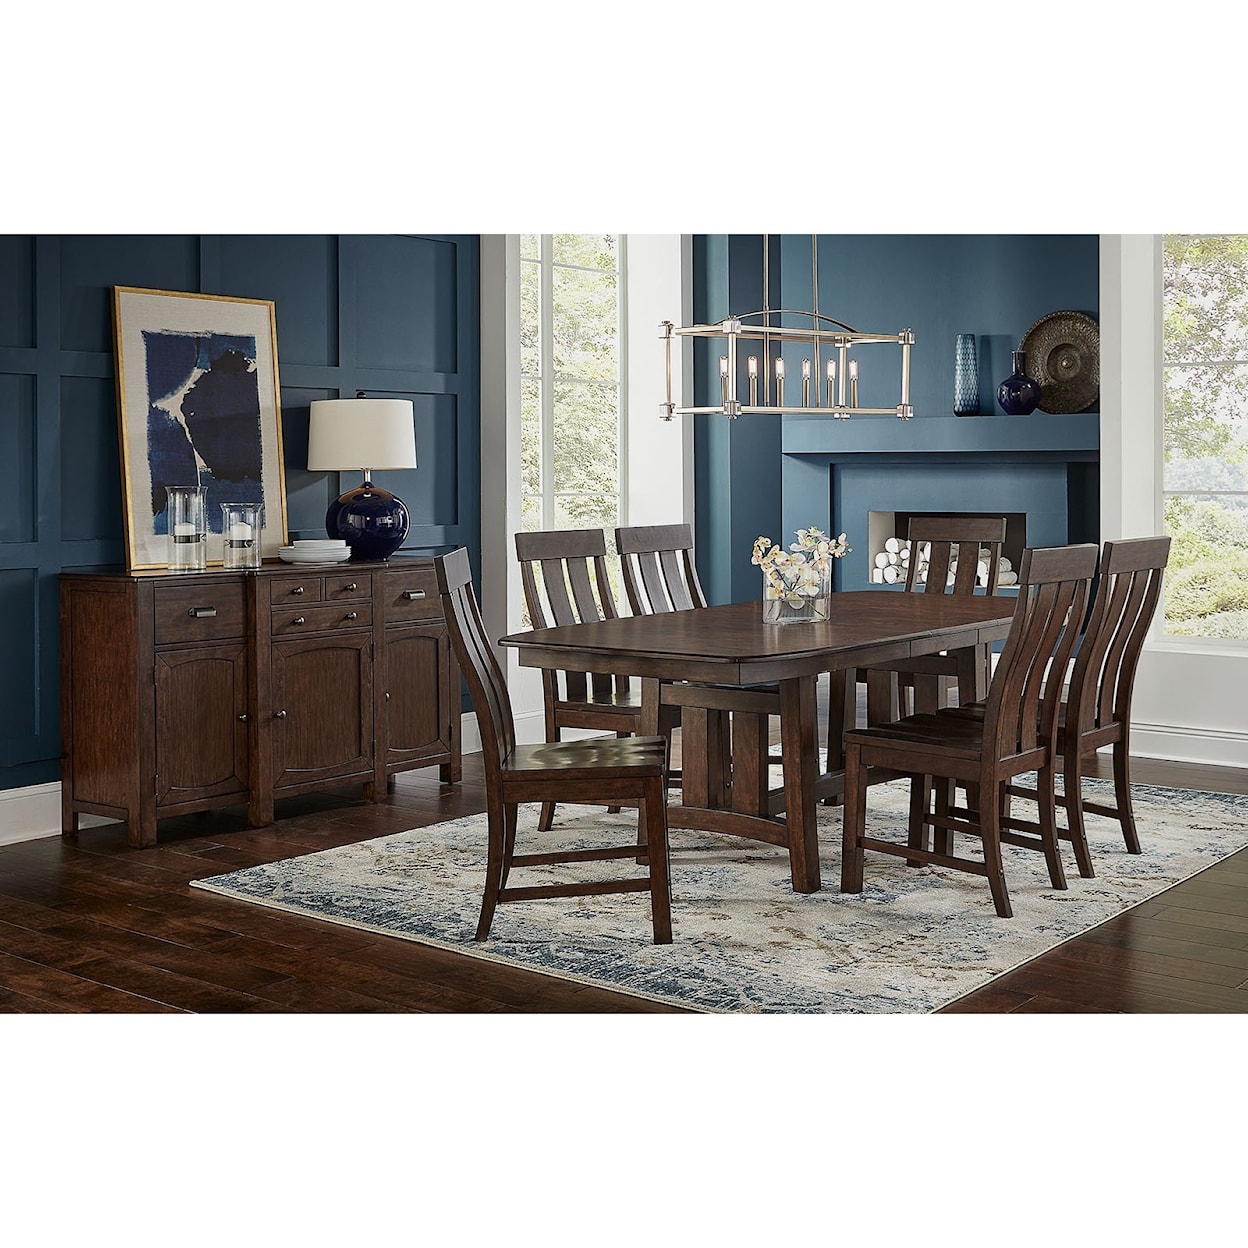 AAmerica Henderson 7-Piece Trestle Table and Chair Set